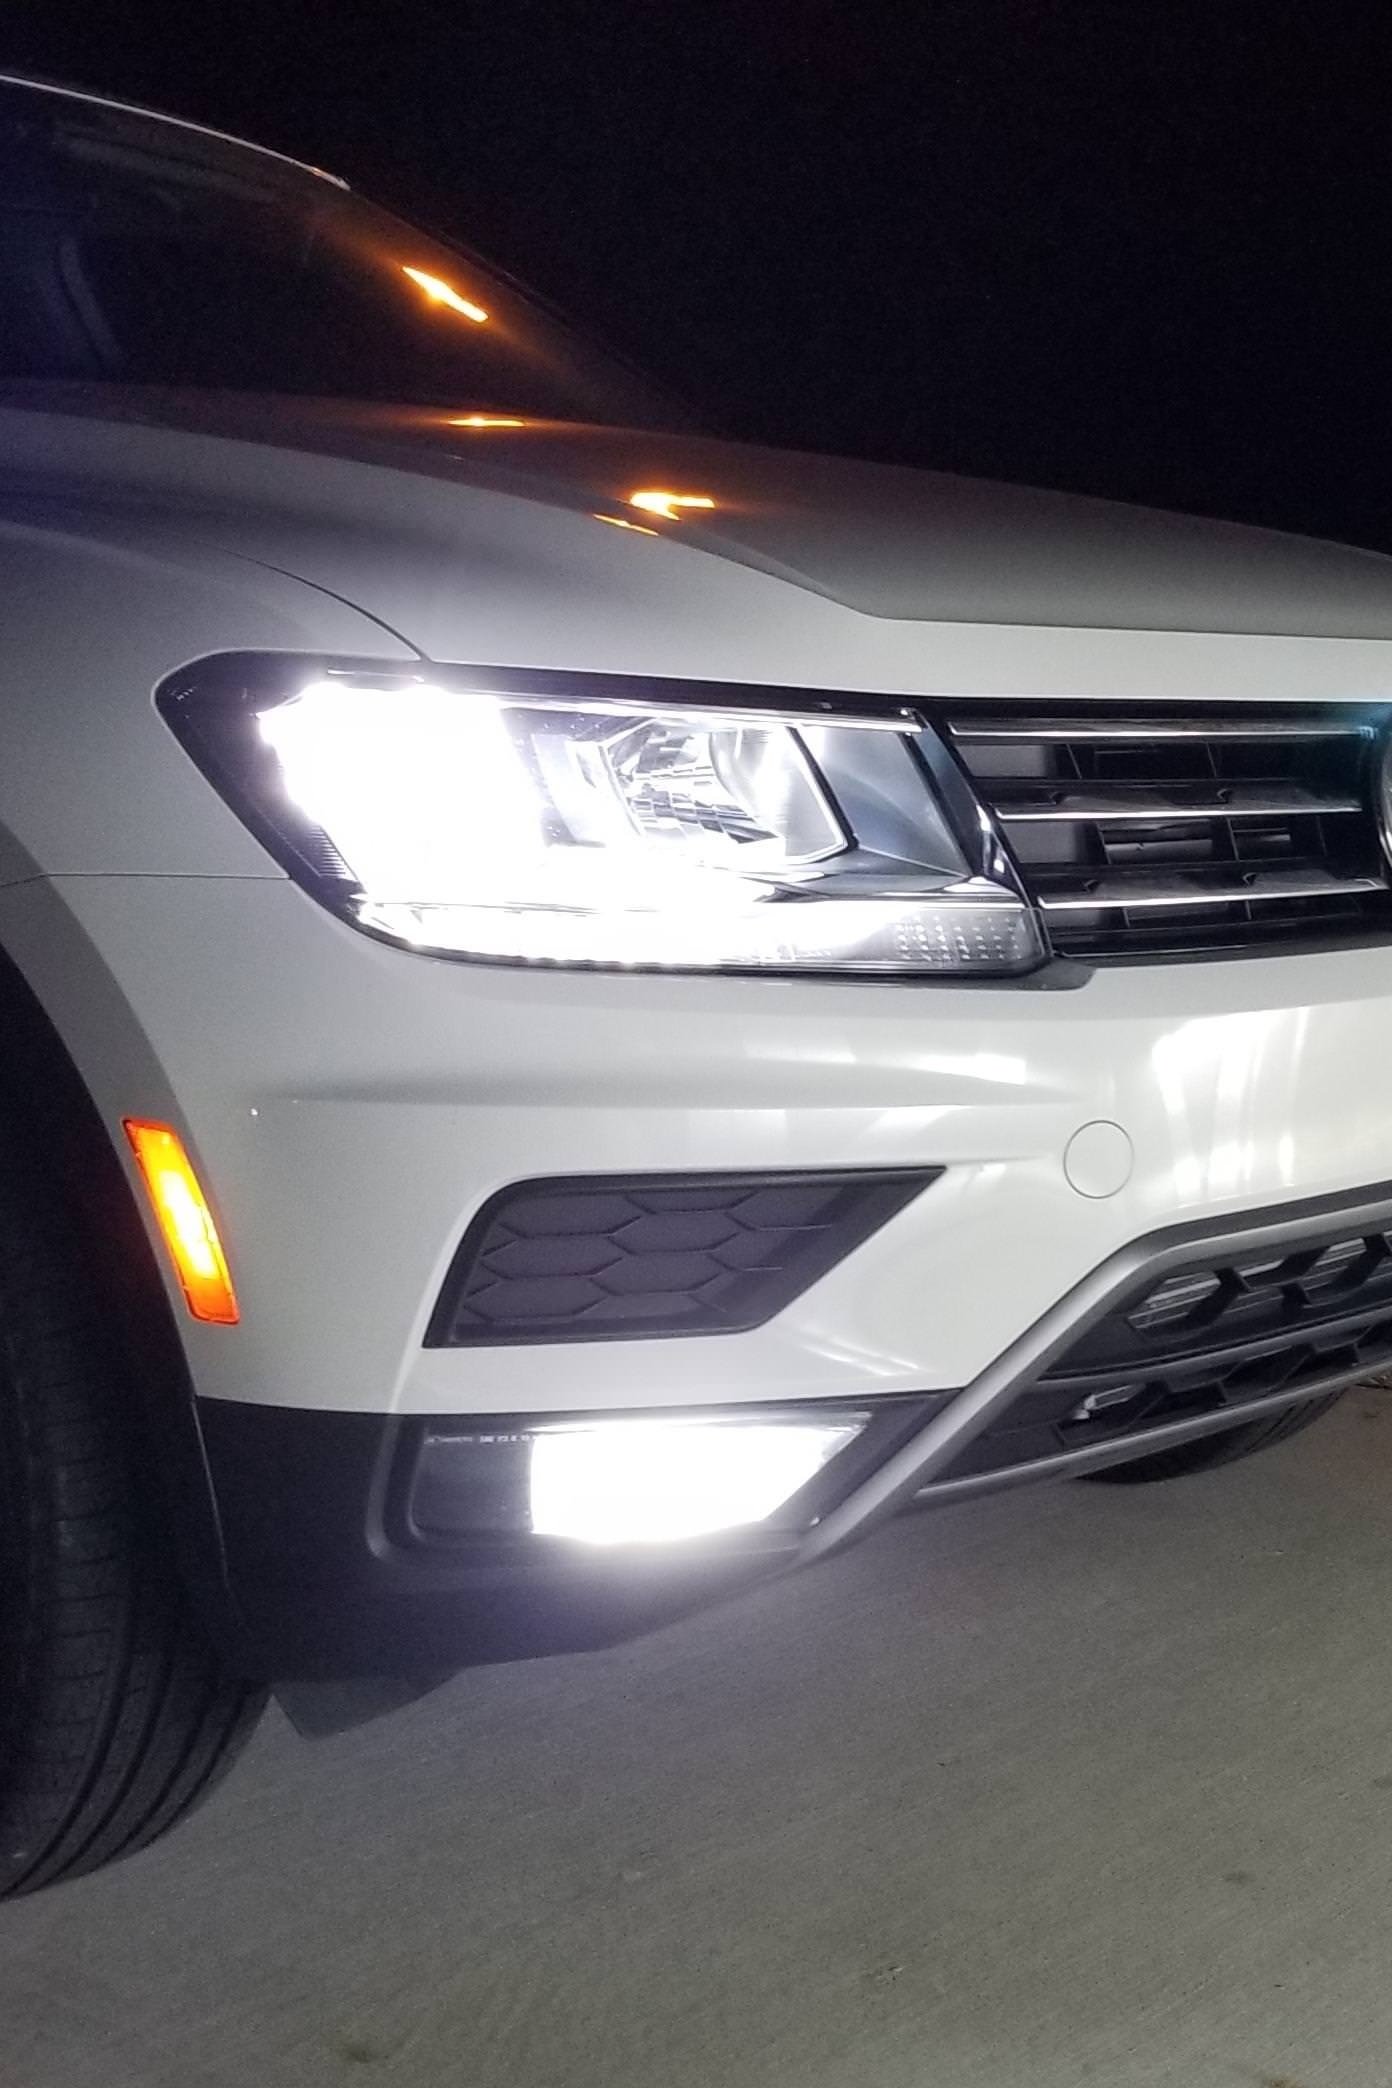 LED Fog Light Kit - Clean White Color Temp with no glare Fits: Volkswagen  Atlas